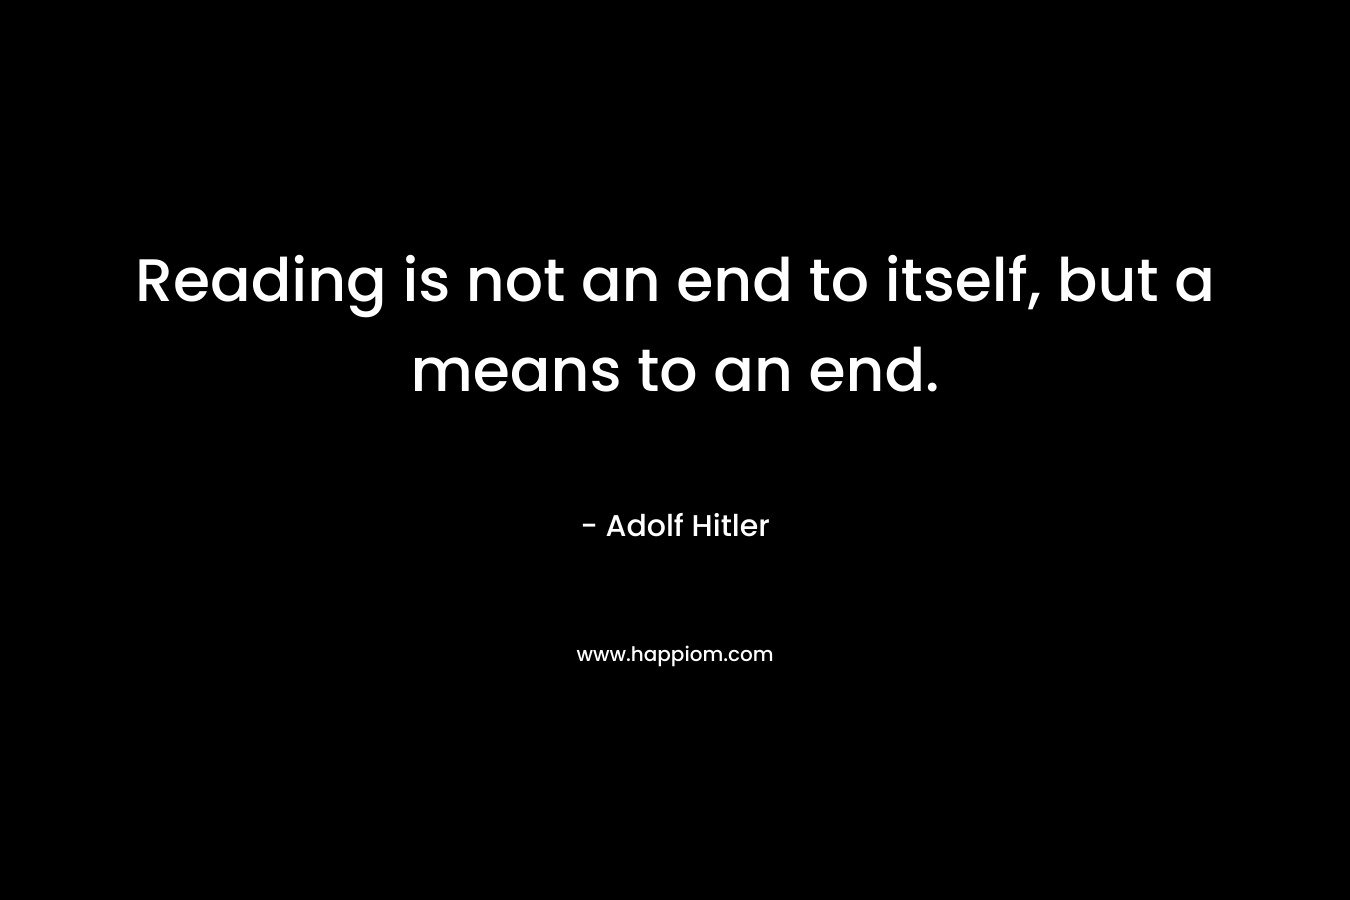 Reading is not an end to itself, but a means to an end. – Adolf Hitler